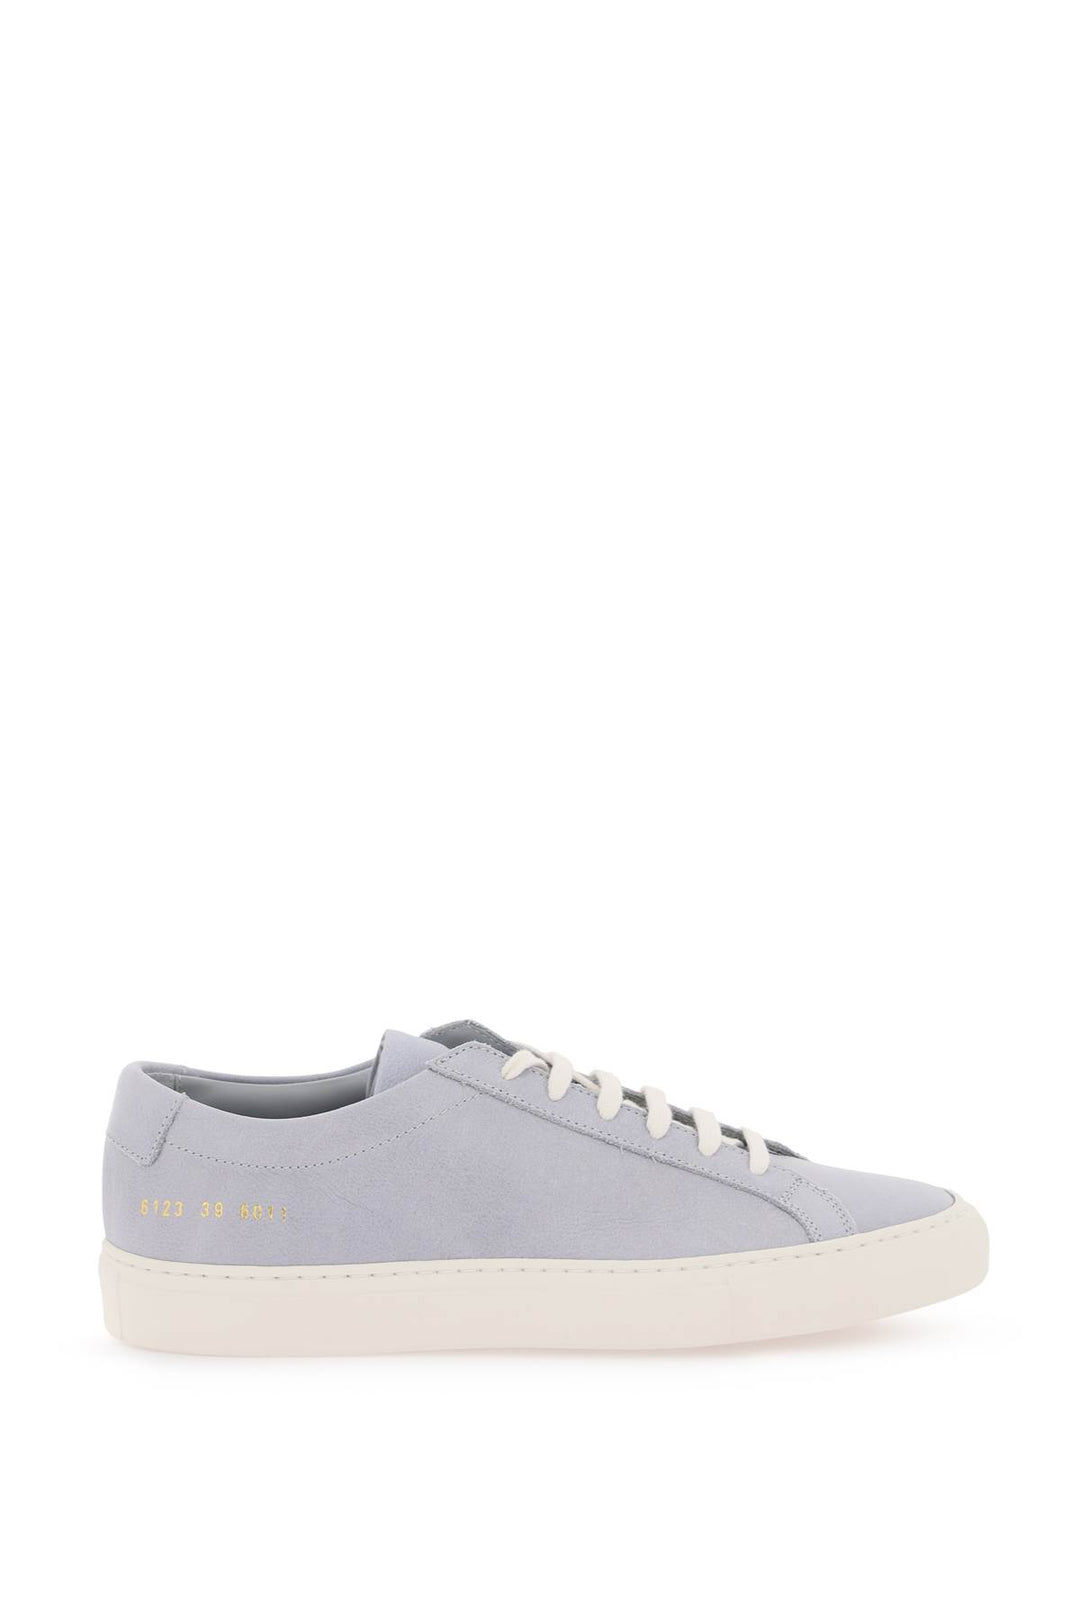 Common Projects Original Achilles Leather Sneakers   Light Blue